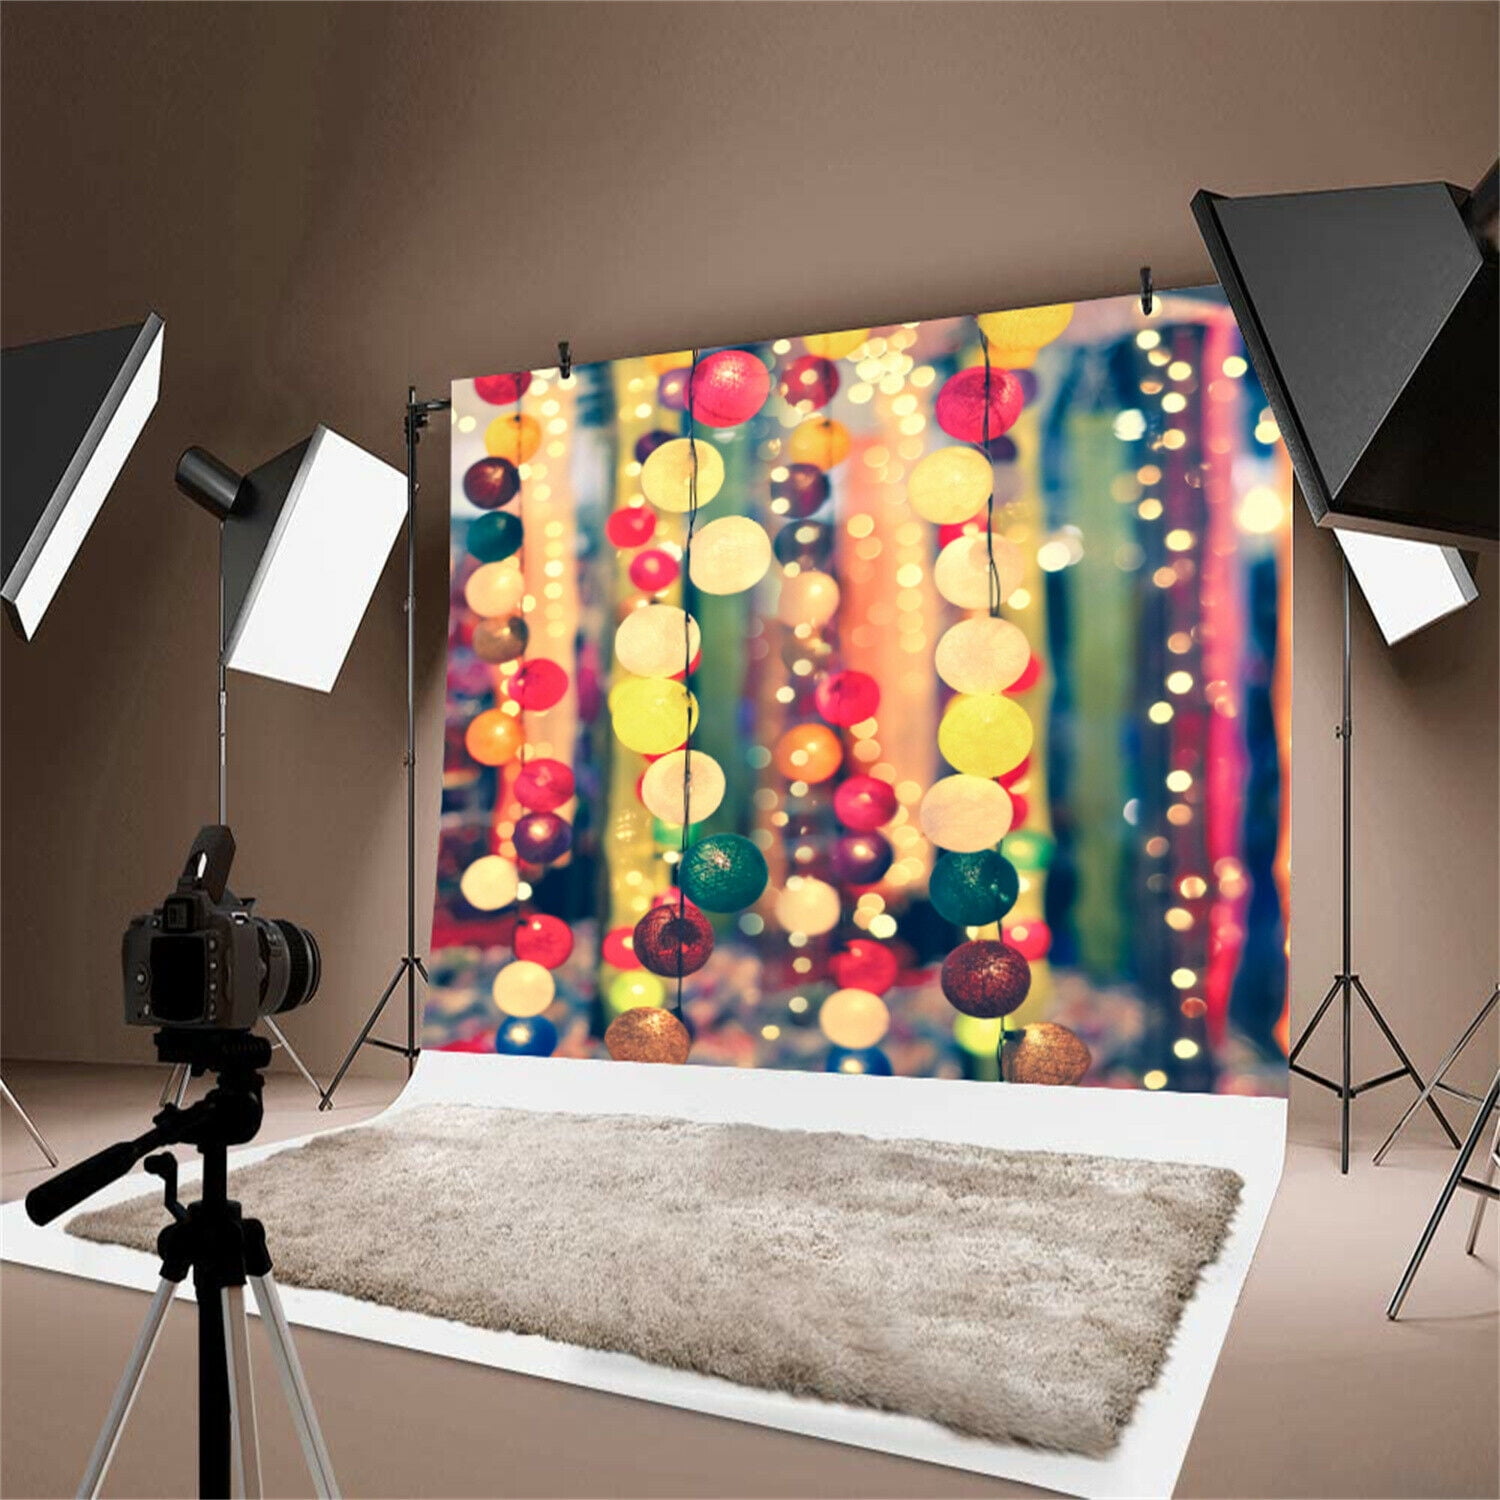 3*5ft 4*4ft 5*7ft White Screen Photography Background Photo Backdrop Cloth